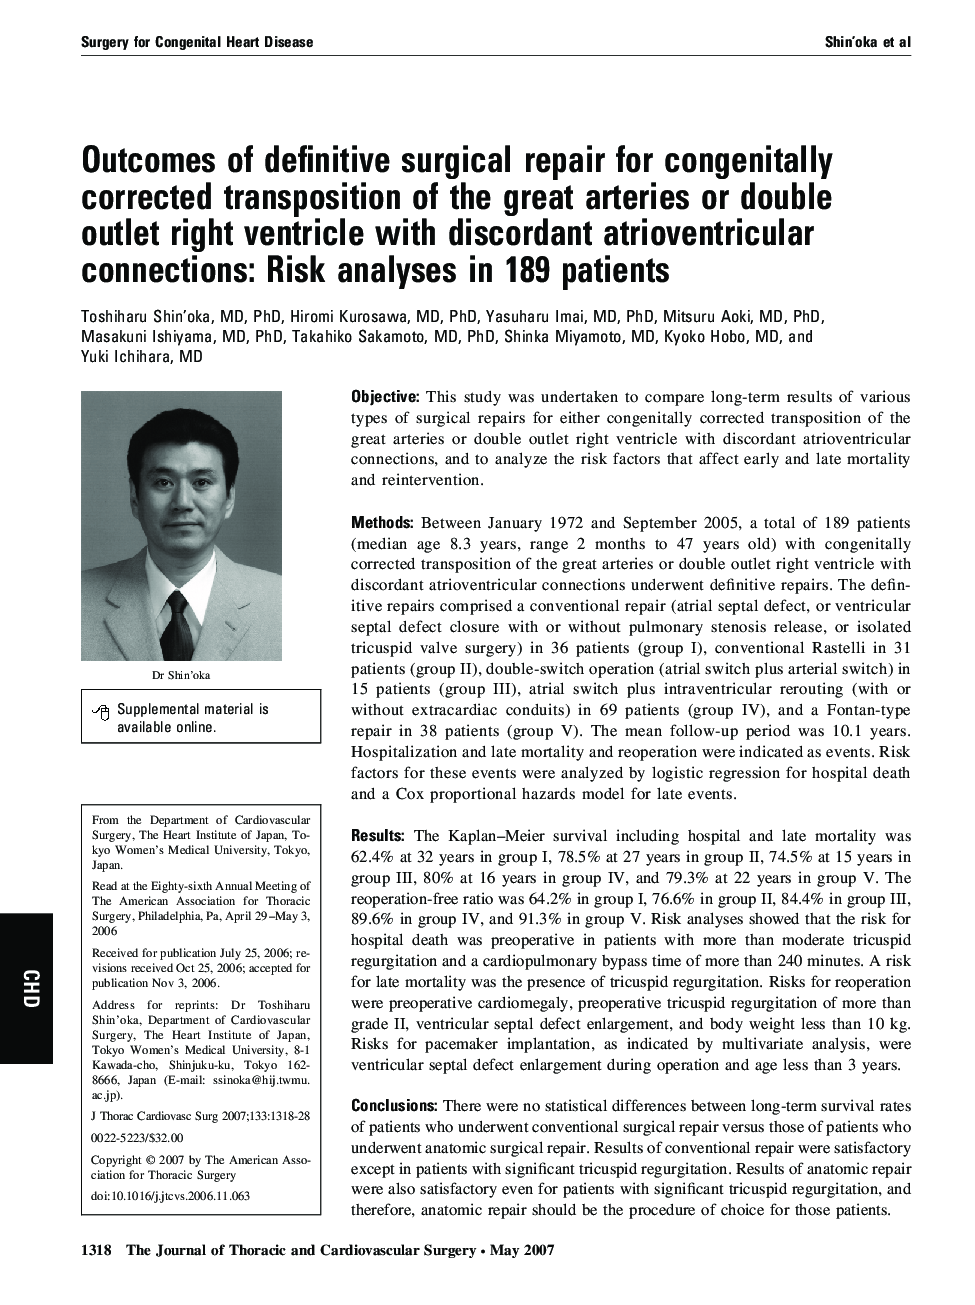 Outcomes of definitive surgical repair for congenitally corrected transposition of the great arteries or double outlet right ventricle with discordant atrioventricular connections: Risk analyses in 189 patients